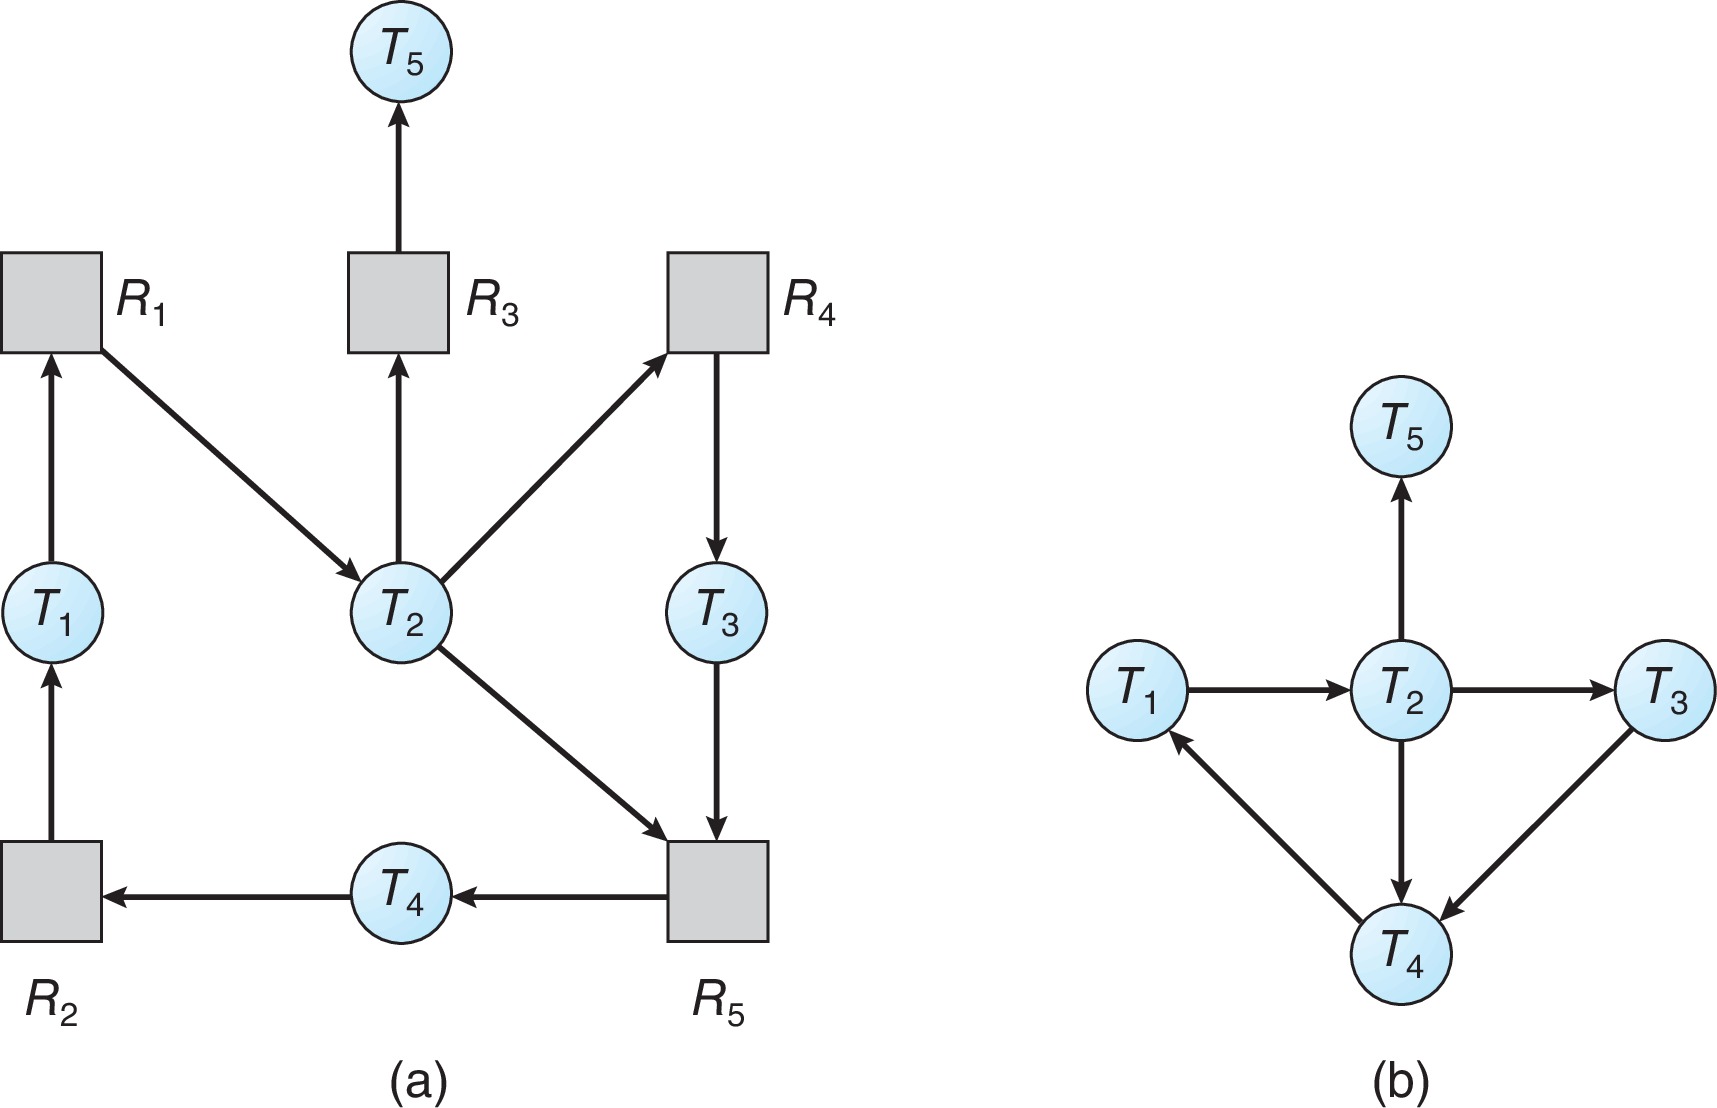 Figure 8.11: (a) Resource-allocation graph. (b) Corresponding wait-for grapth.